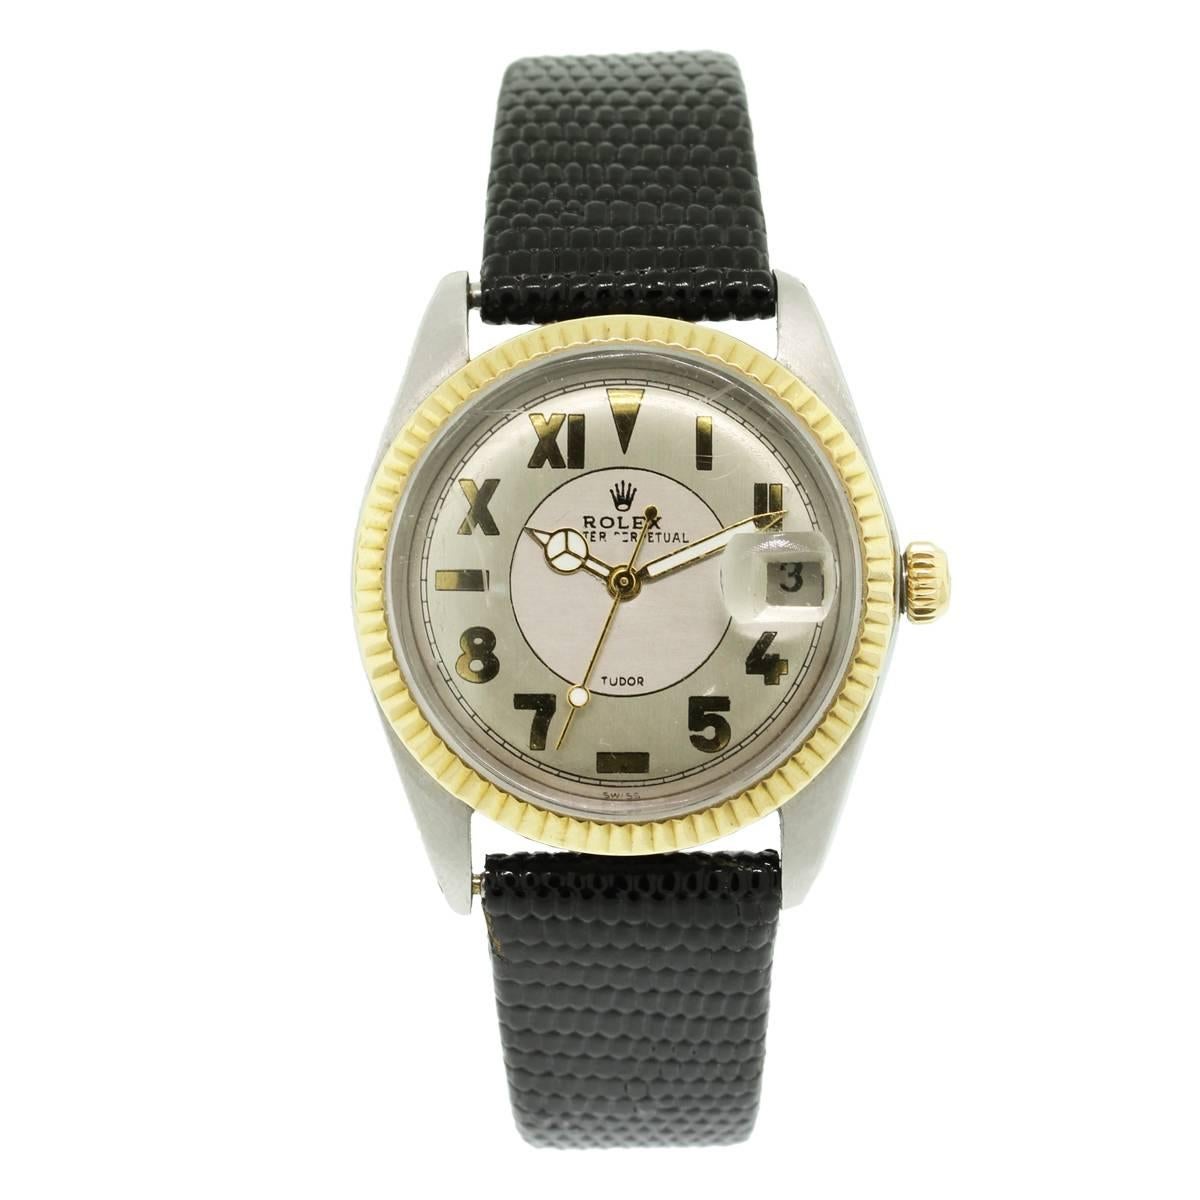 
Brand	Rolex/Tudor
Case Material	Stainless Steel
Case Diameter	34 mm
Bezel	Yellow Gold Fluted Bezel
Movement	Automatic
Size	Adjustable
Additional Details	This item comes with a presentation box!